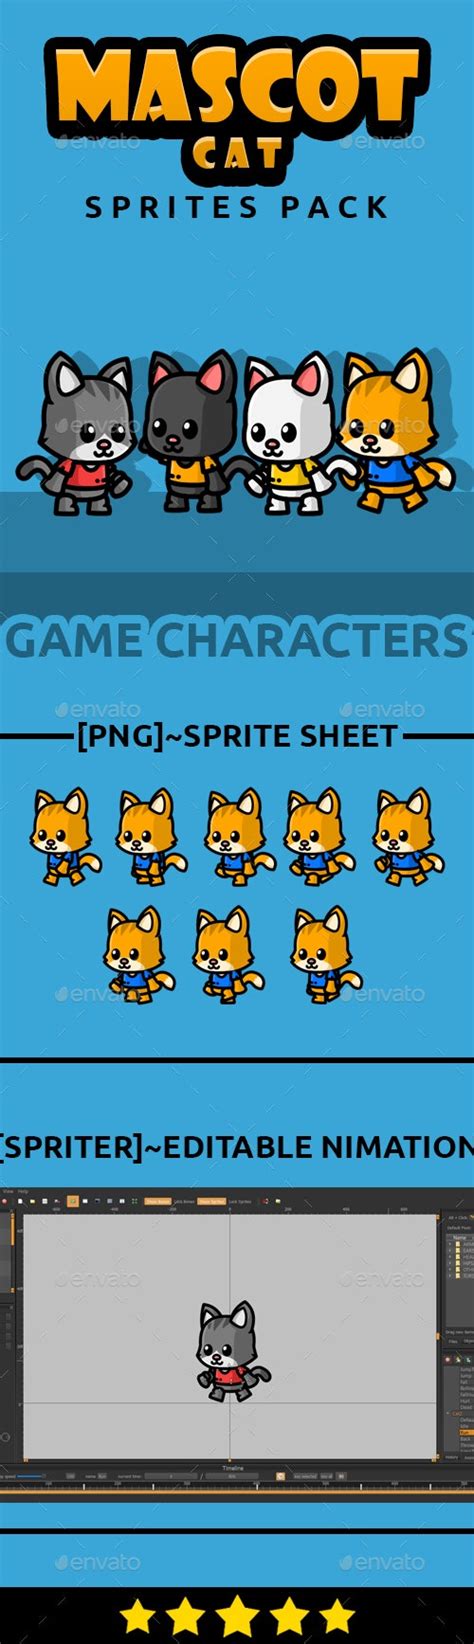 Mascot Cat Sprites Pack Game Assets Graphicriver